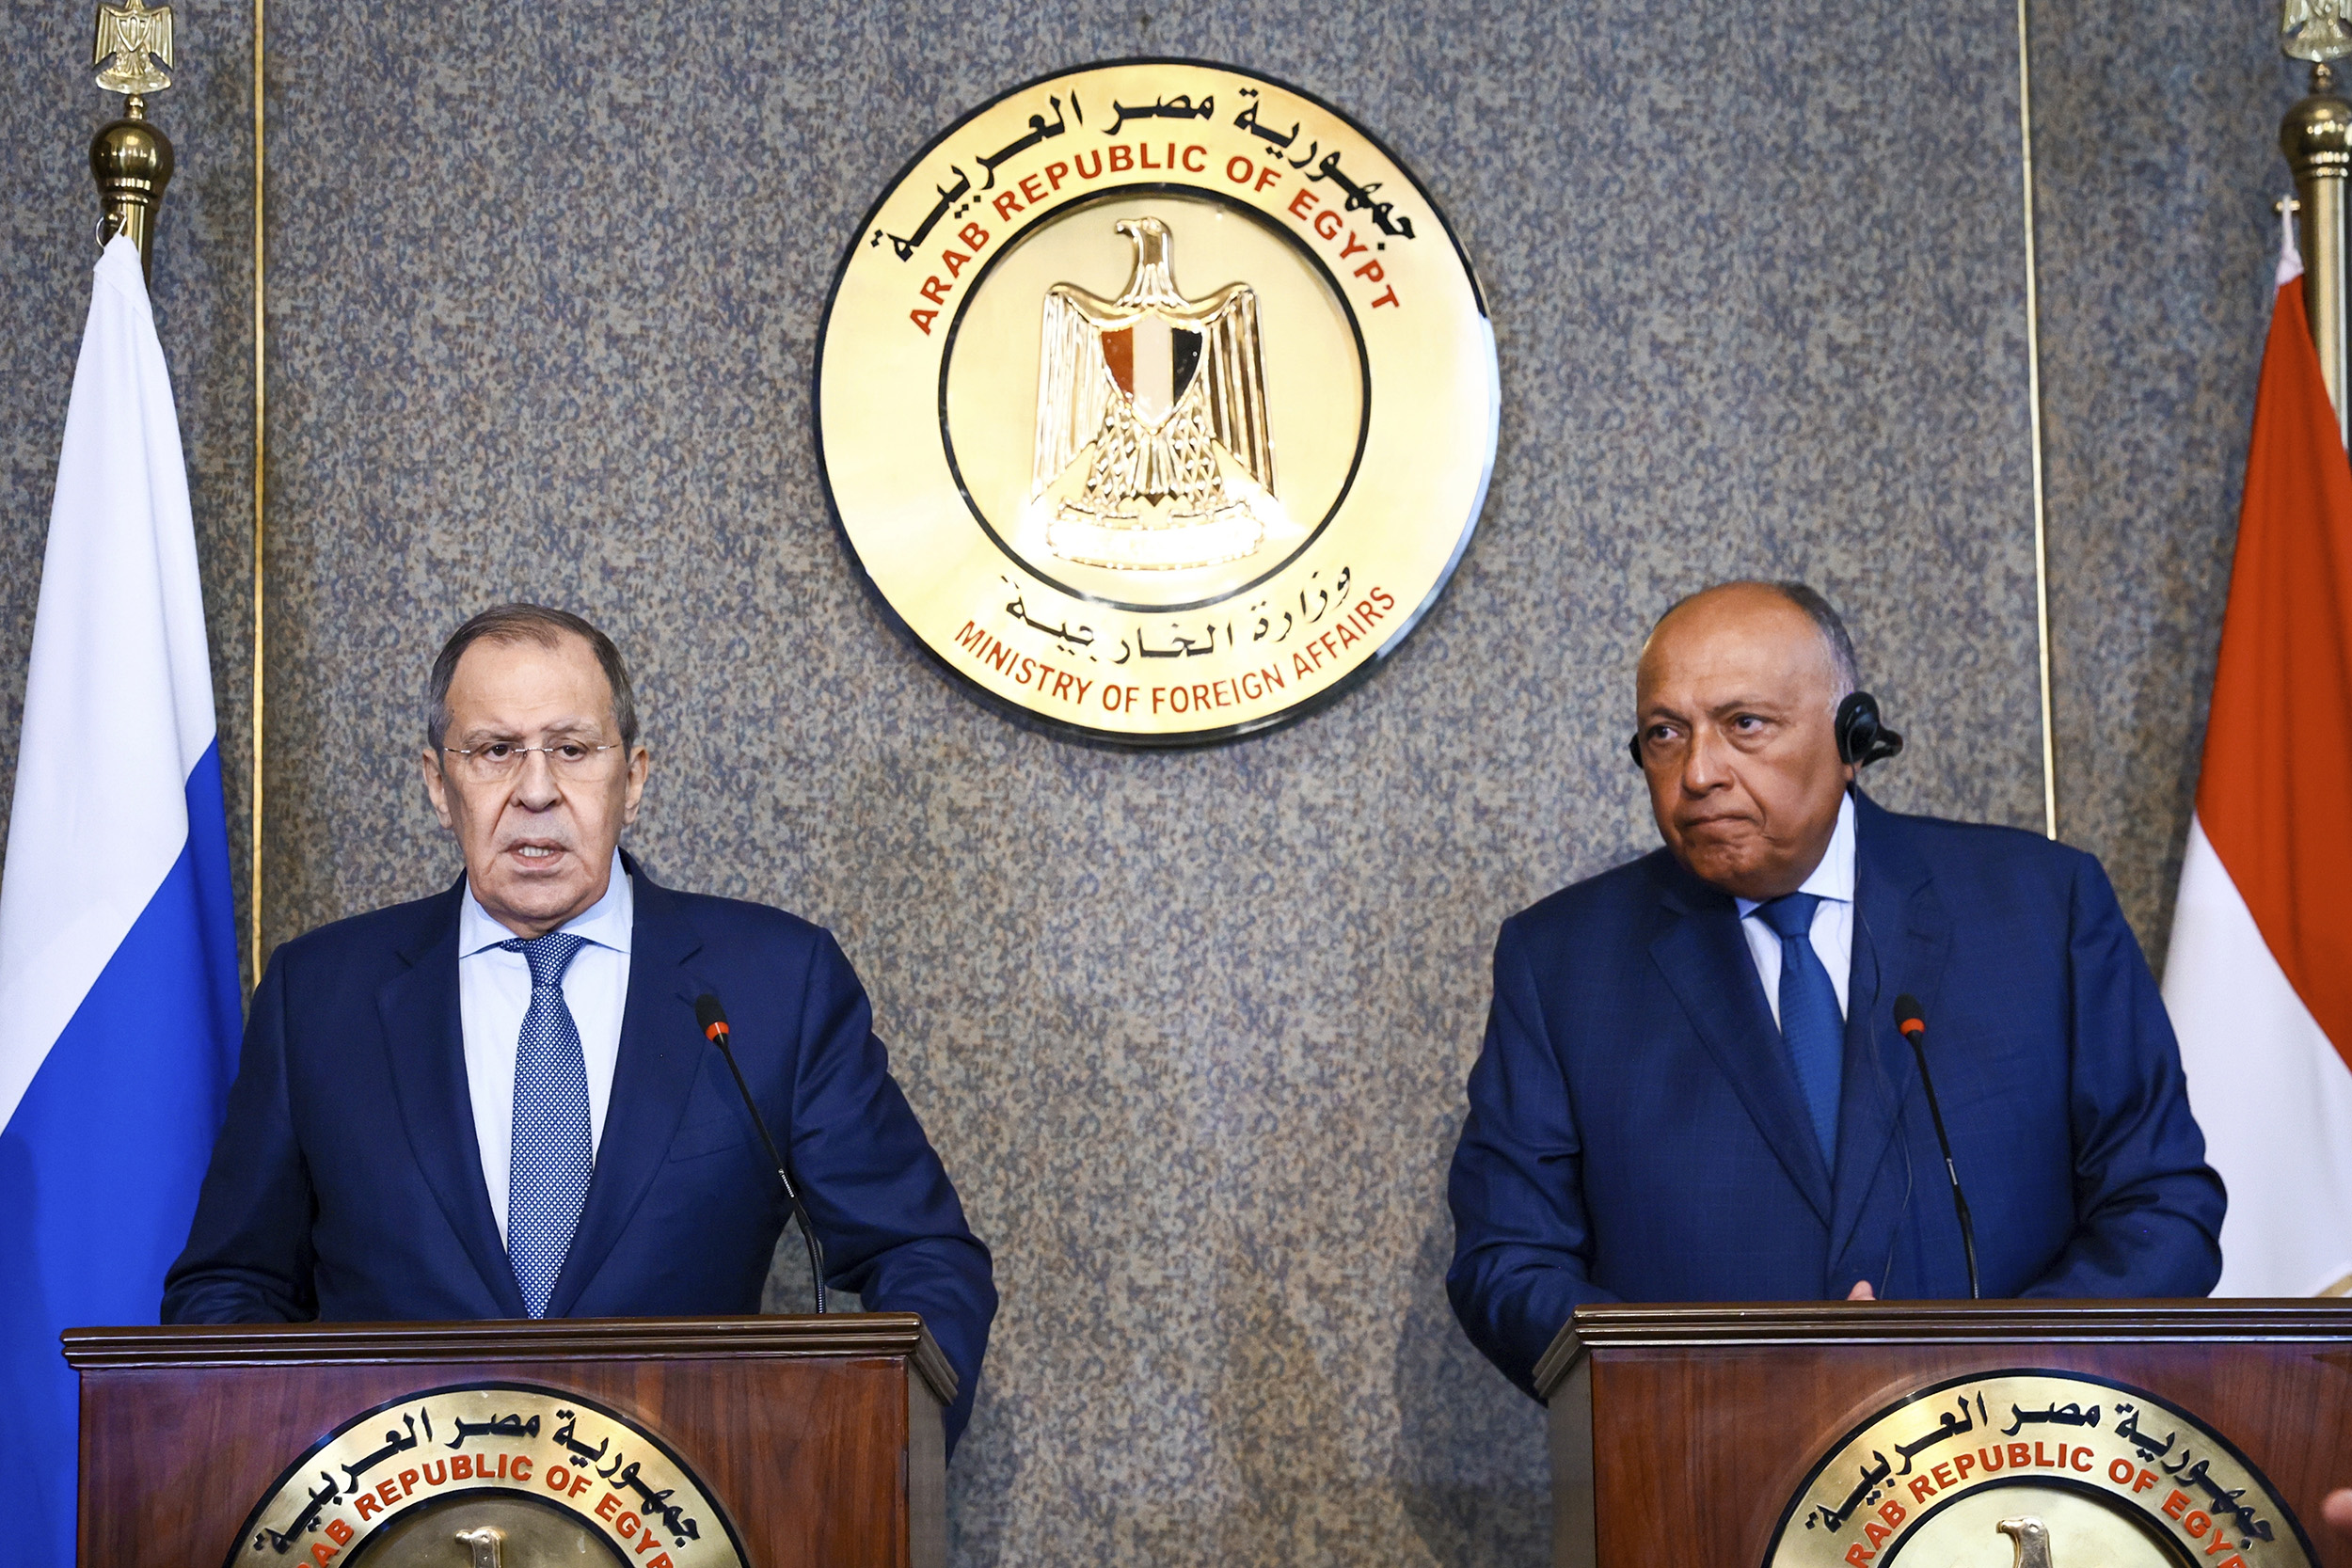 Russian Foreign Minister Sergey Lavrov, left, and Egyptian Minister of Foreign Affairs Sameh Shoukry, right, attend a joint news conference following their talks in Cairo, Egypt, on July 24.